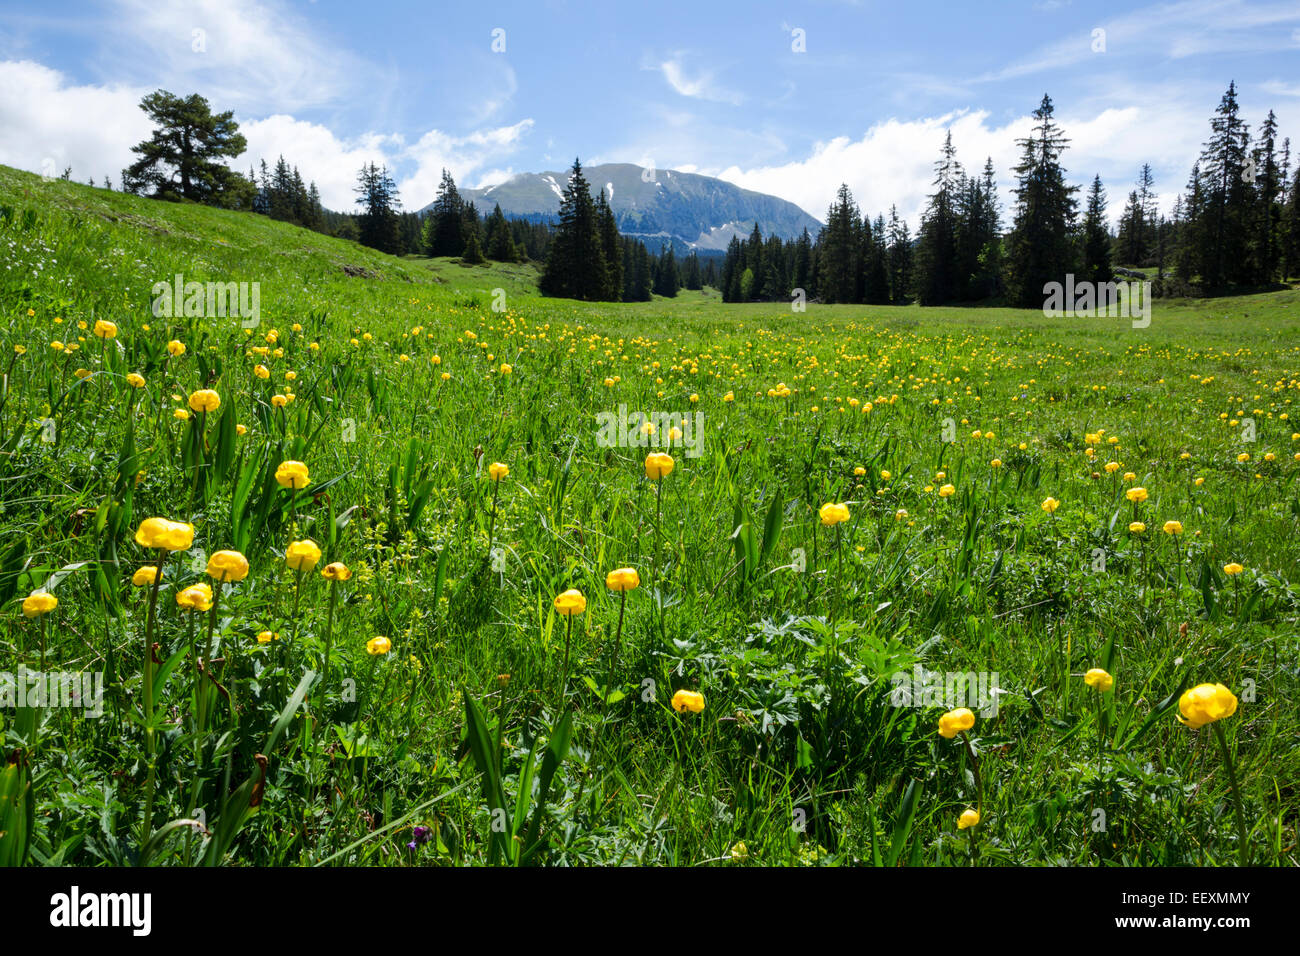 Globeflowers, Latin name Trollius europaeus, in a grassy meadow in the Vercors nature park, France, June Stock Photo